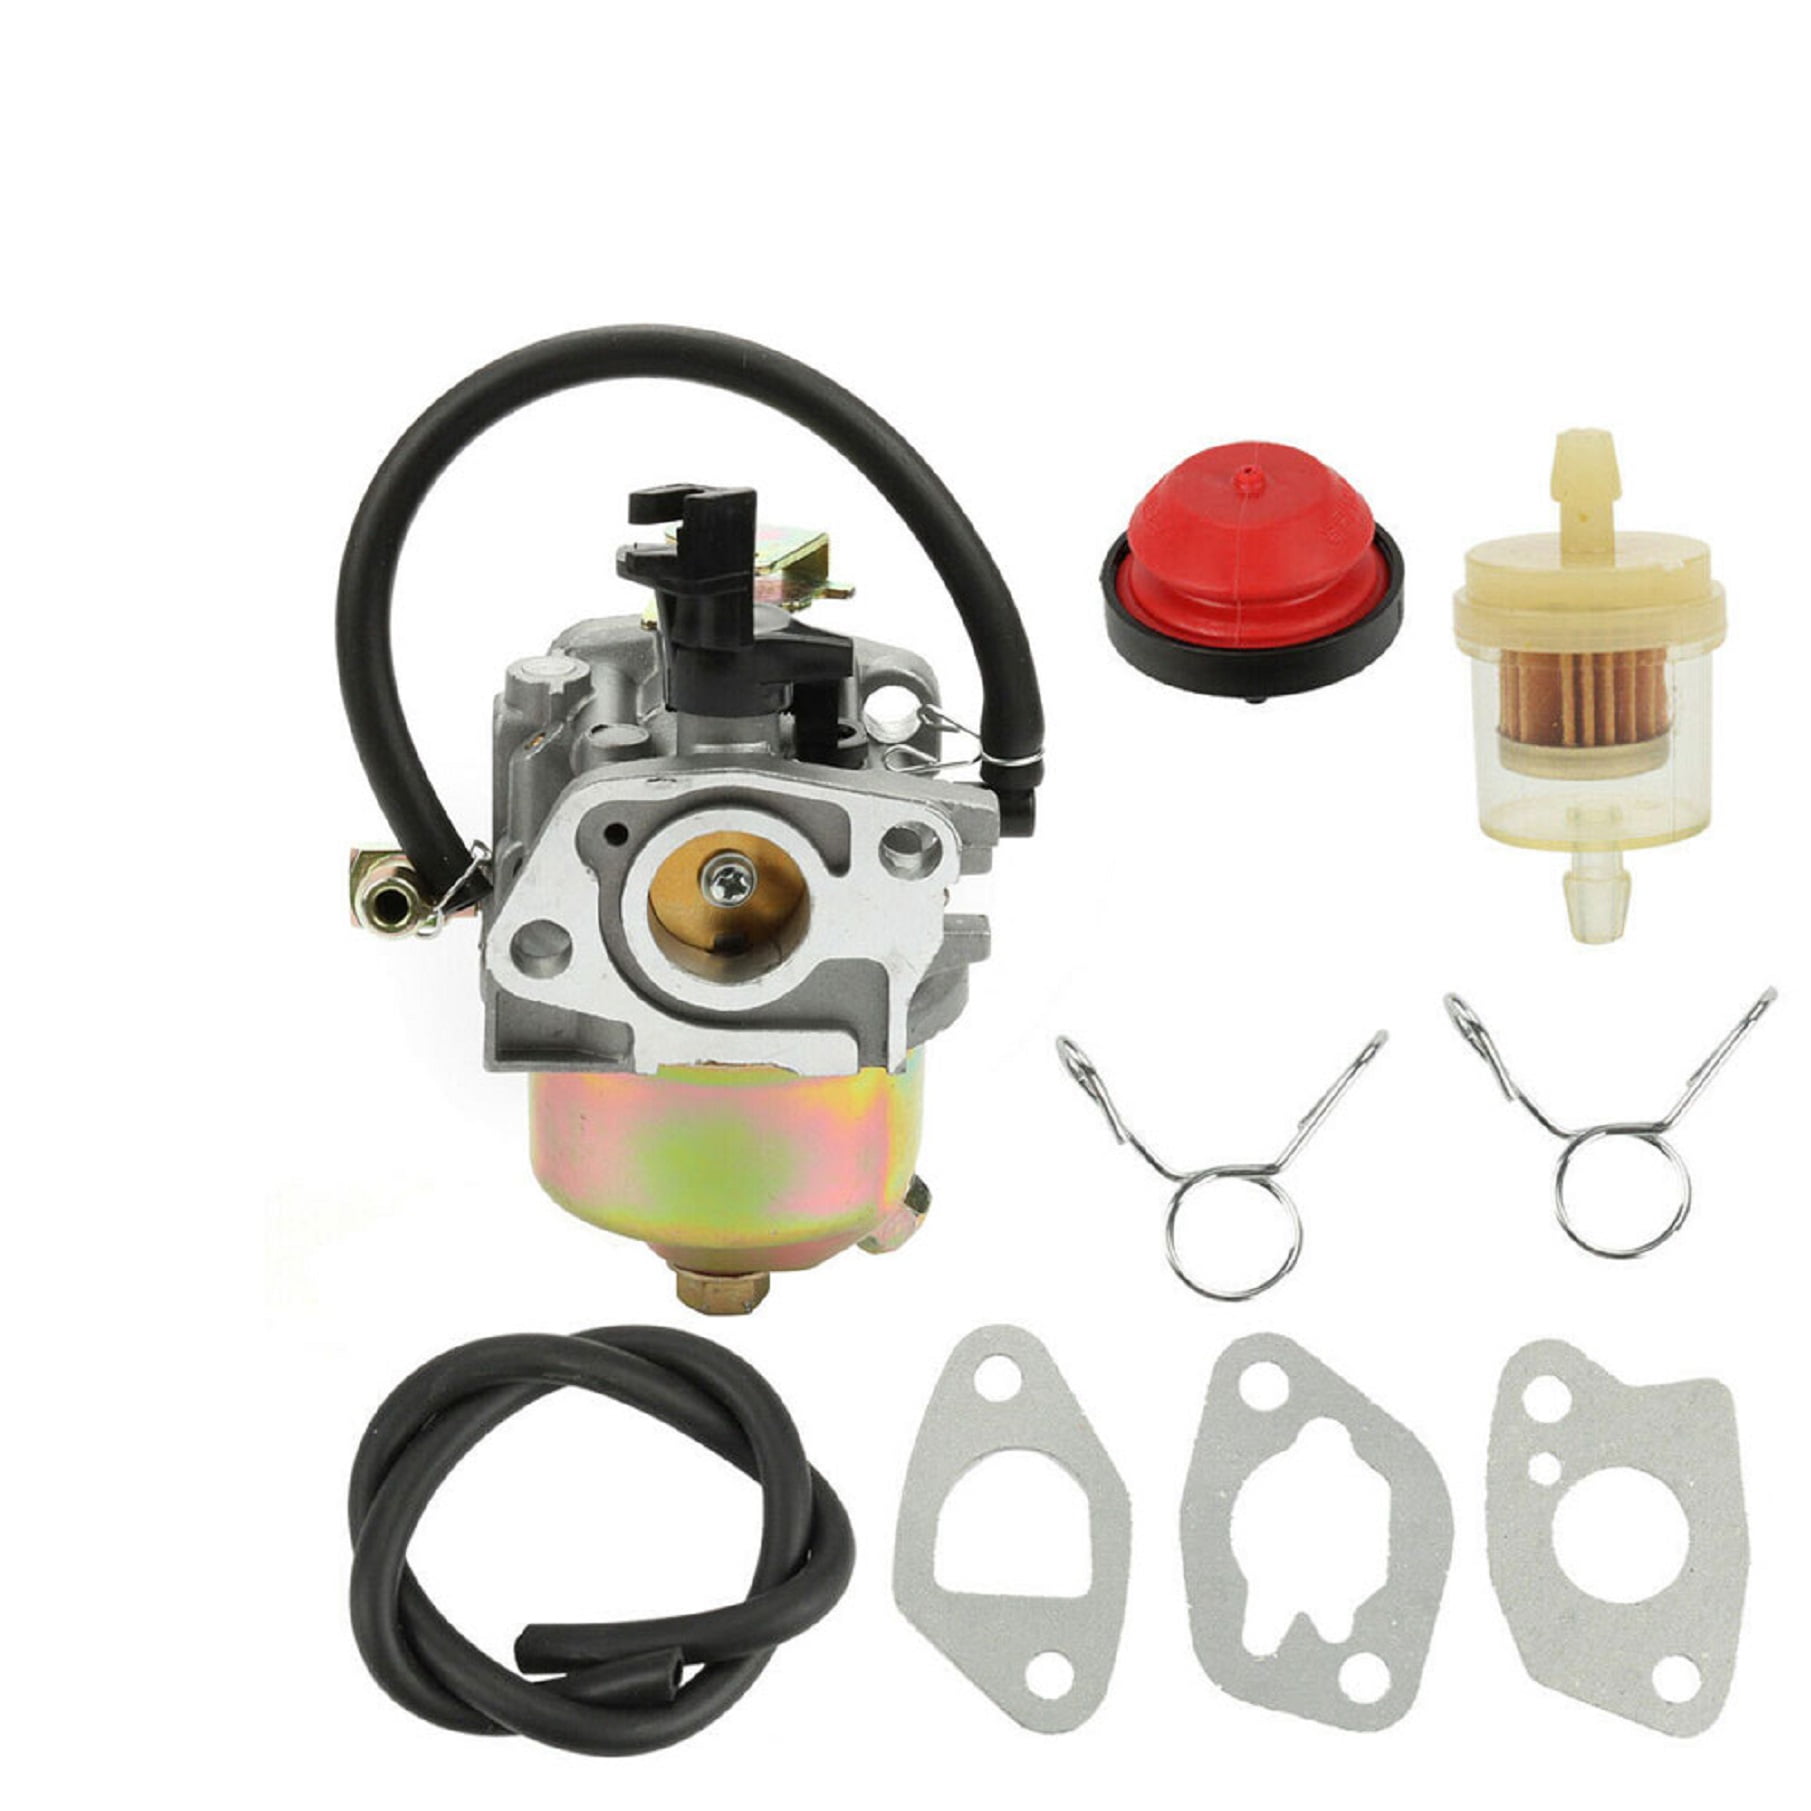 Carburetor Replacement for MTD Cub Cadet Troy Bilt Snow Blower Engines 951-10974 951-10974A 951-12705 w/Gaskets 